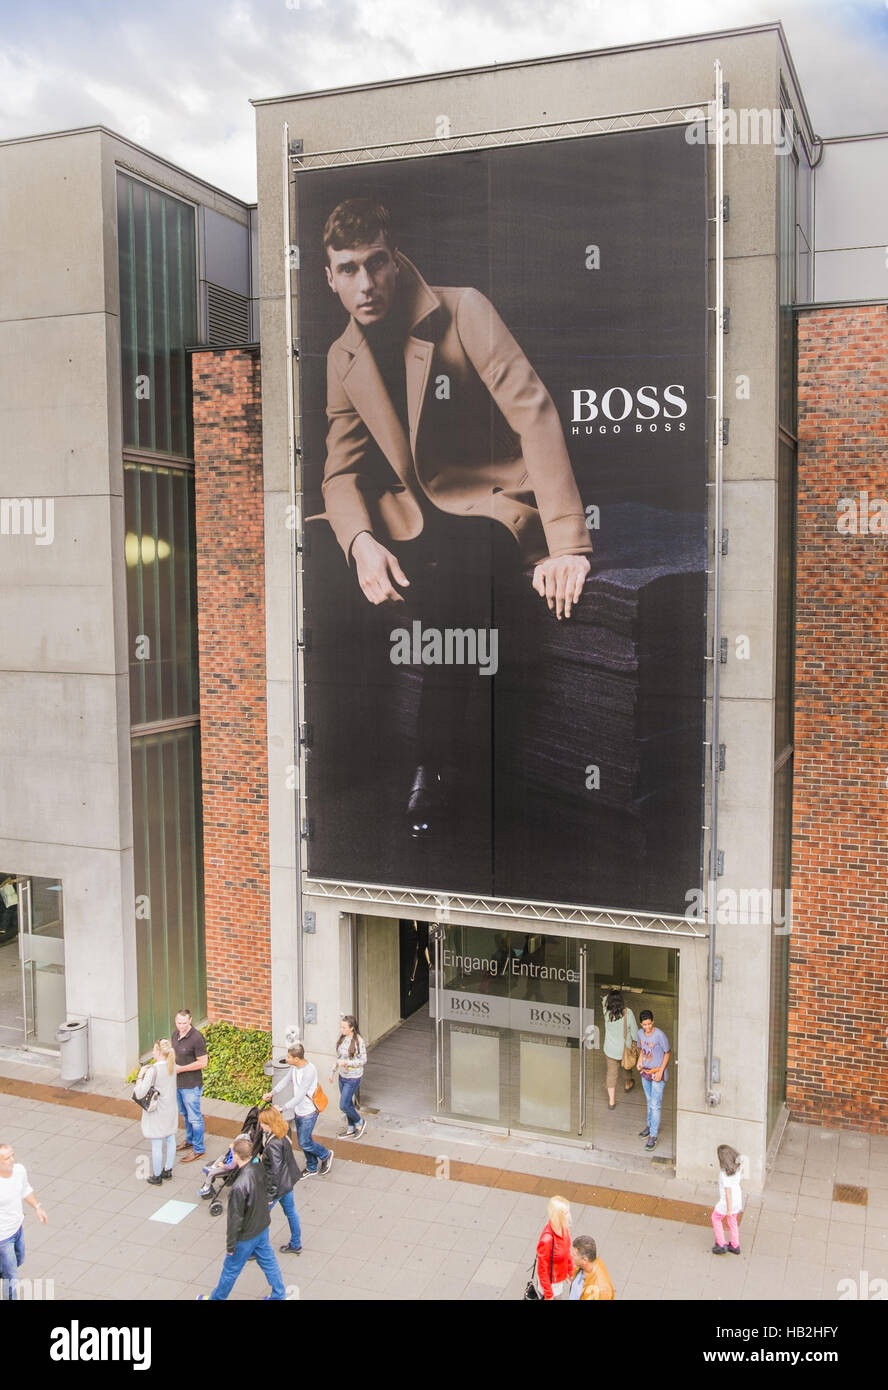 hugo boss, factory outlet Stock Photo